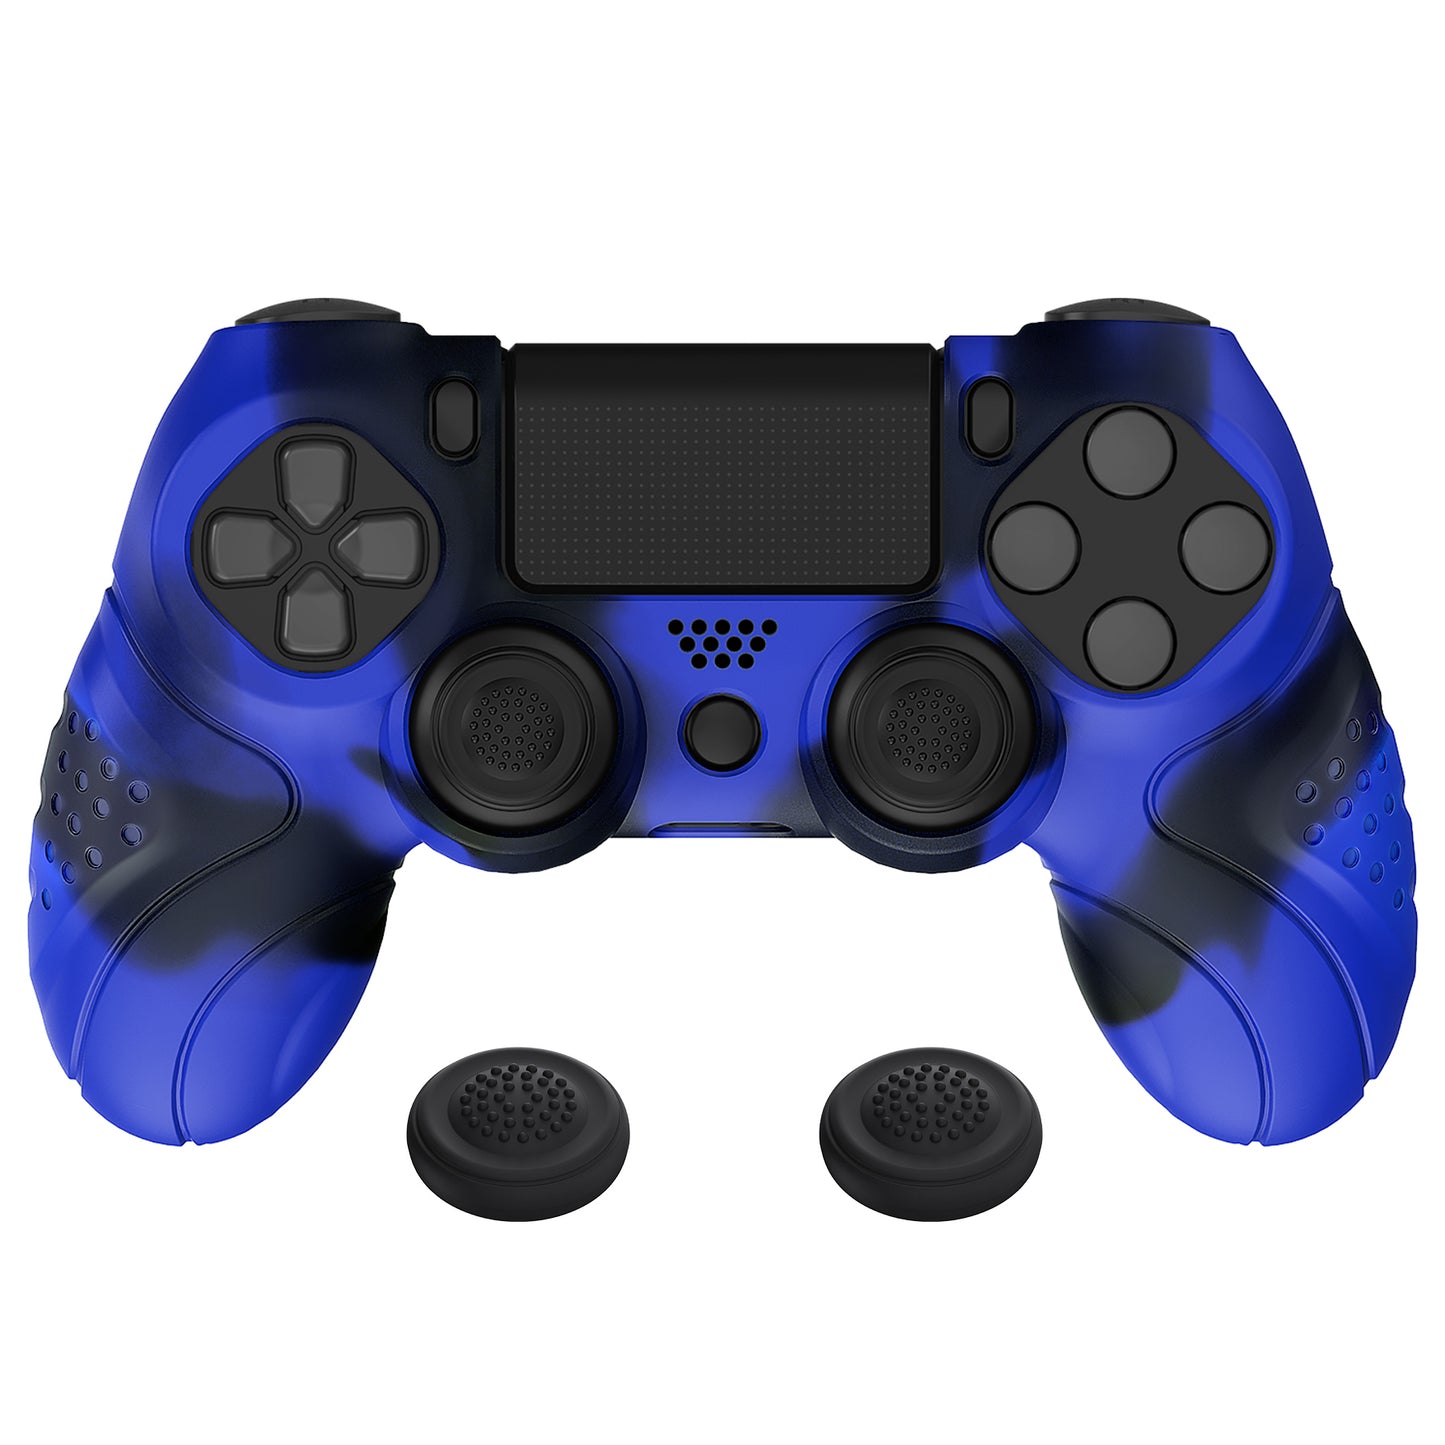 PlayVital Guardian Edition Blue & Black Ergonomic Soft Anti-Slip Controller Silicone Case Cover for ps4, Rubber Protector Skin with Joystick Caps for ps4 Slim/Pro Controller - P4CC0070 playvital